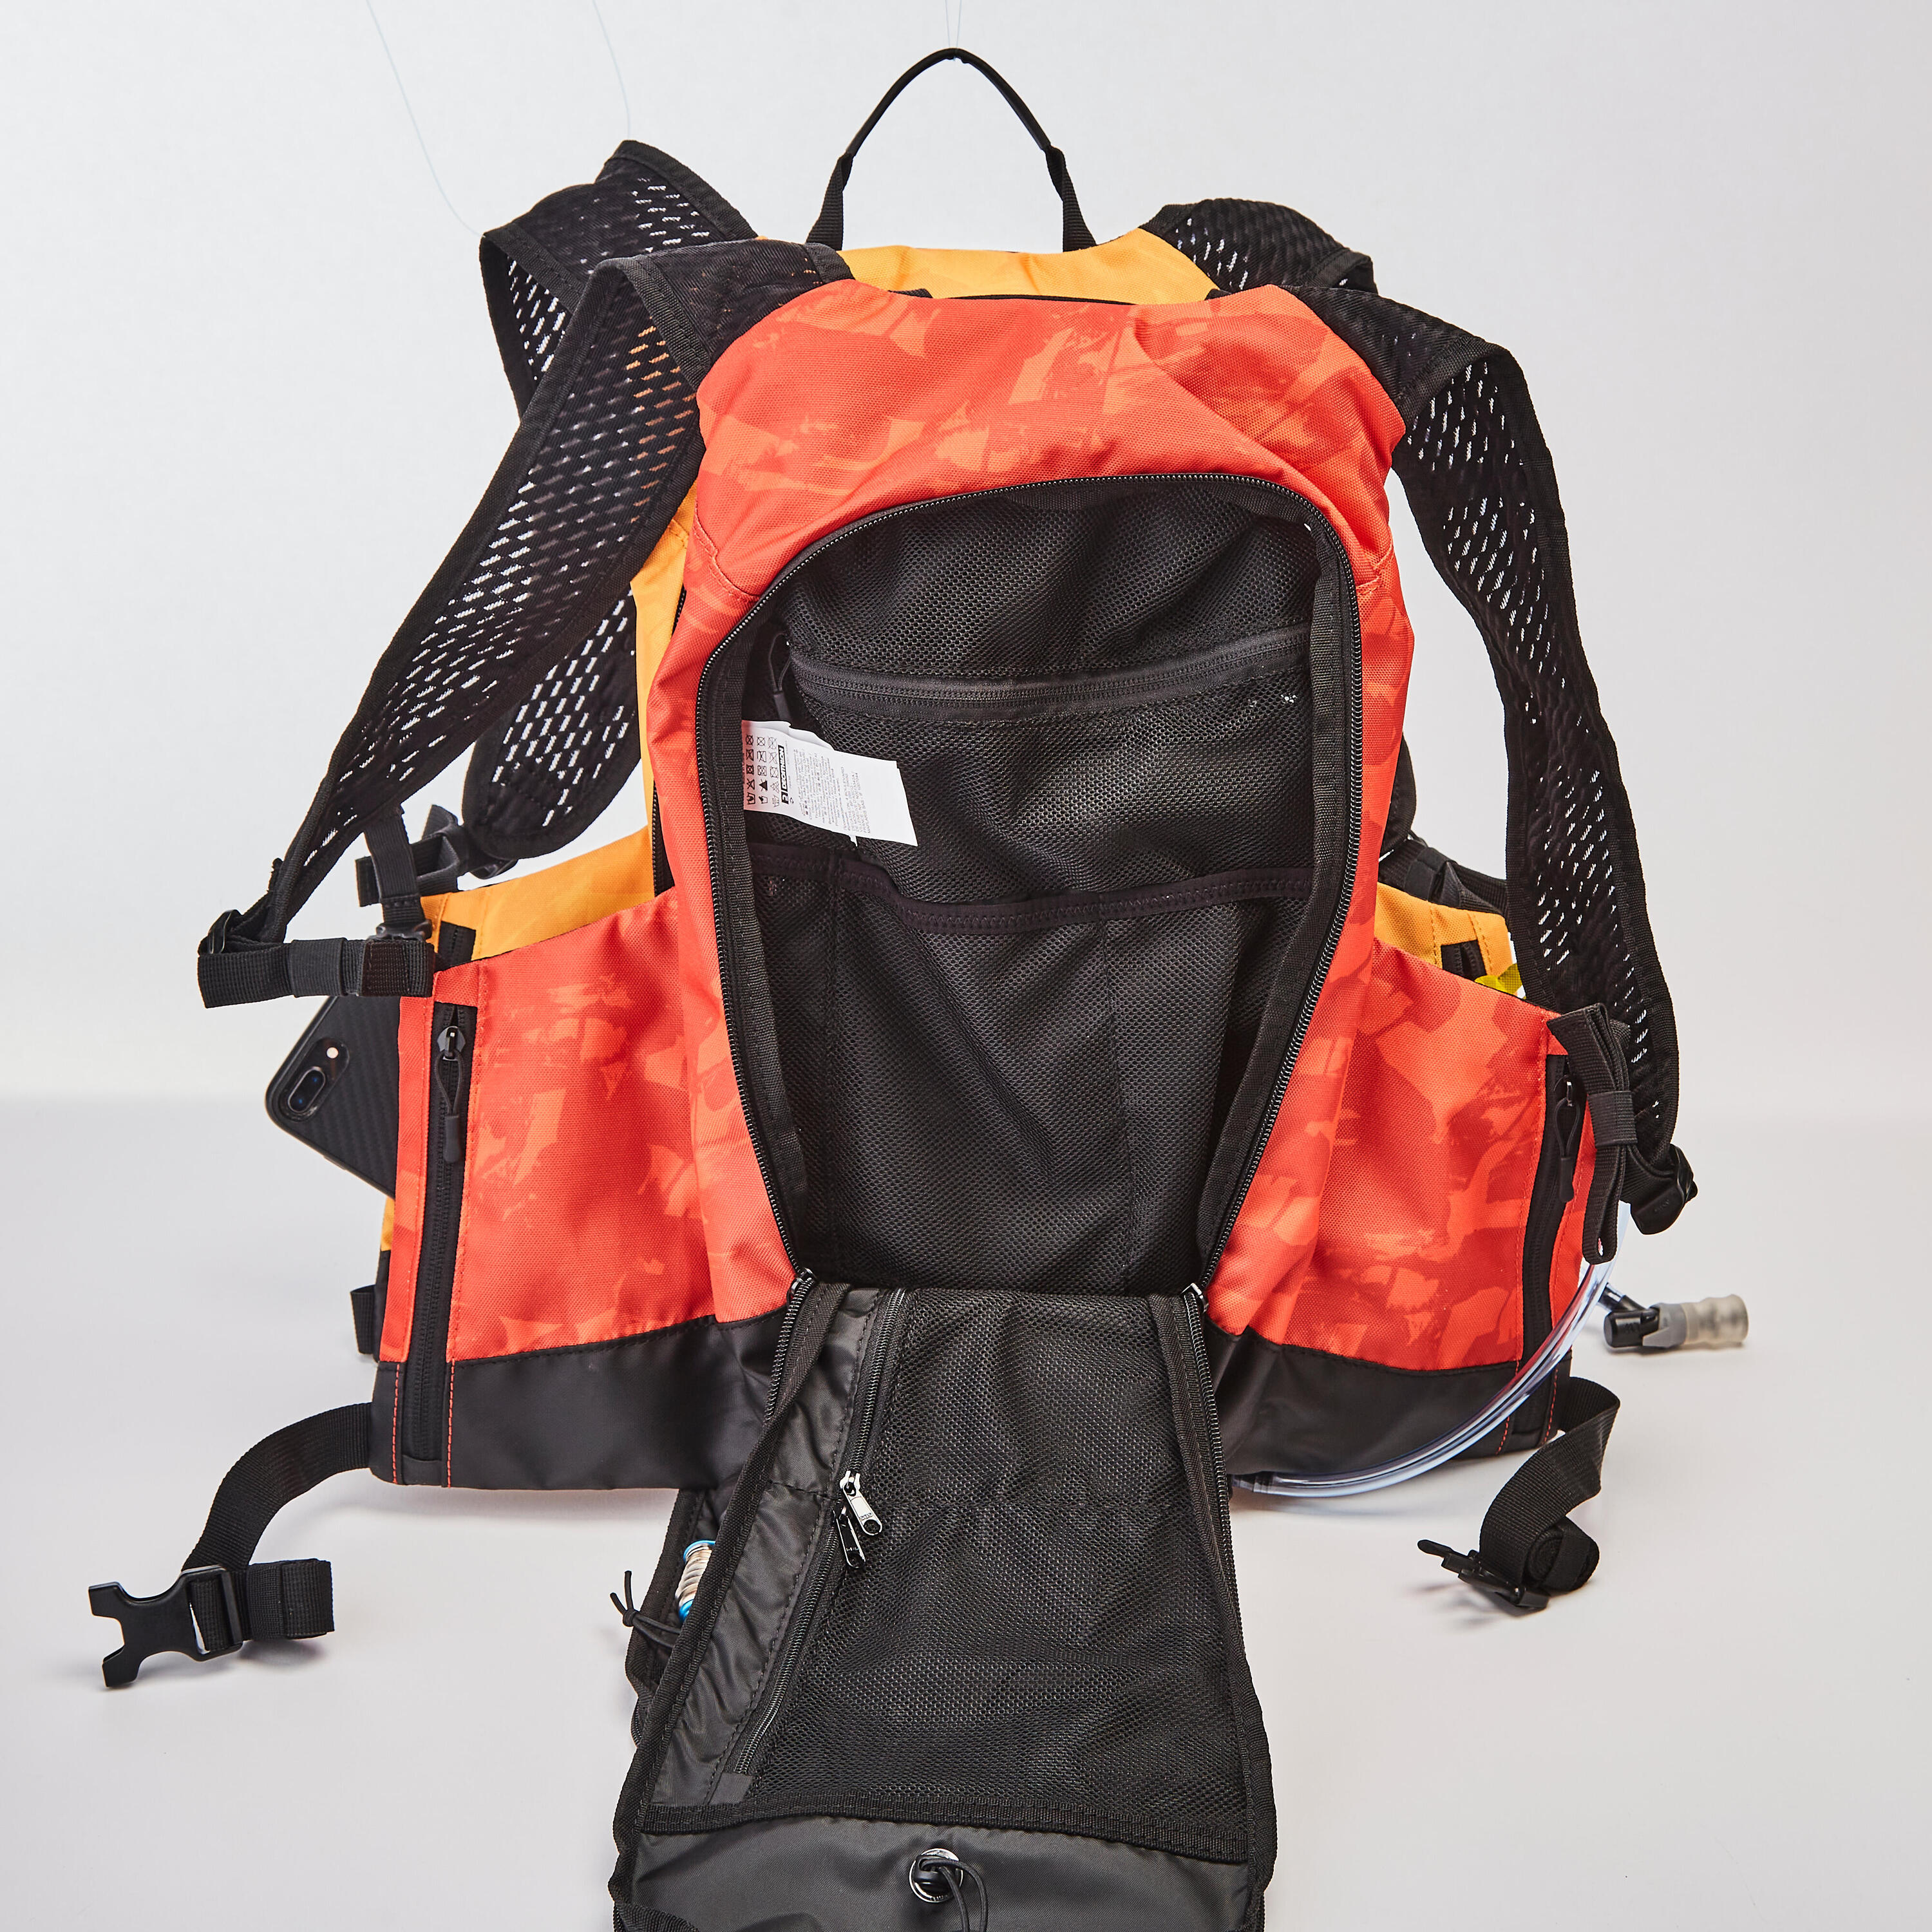 Mountain Bike Hydration Backpack Explore 7L/2L Water - Red 4/13